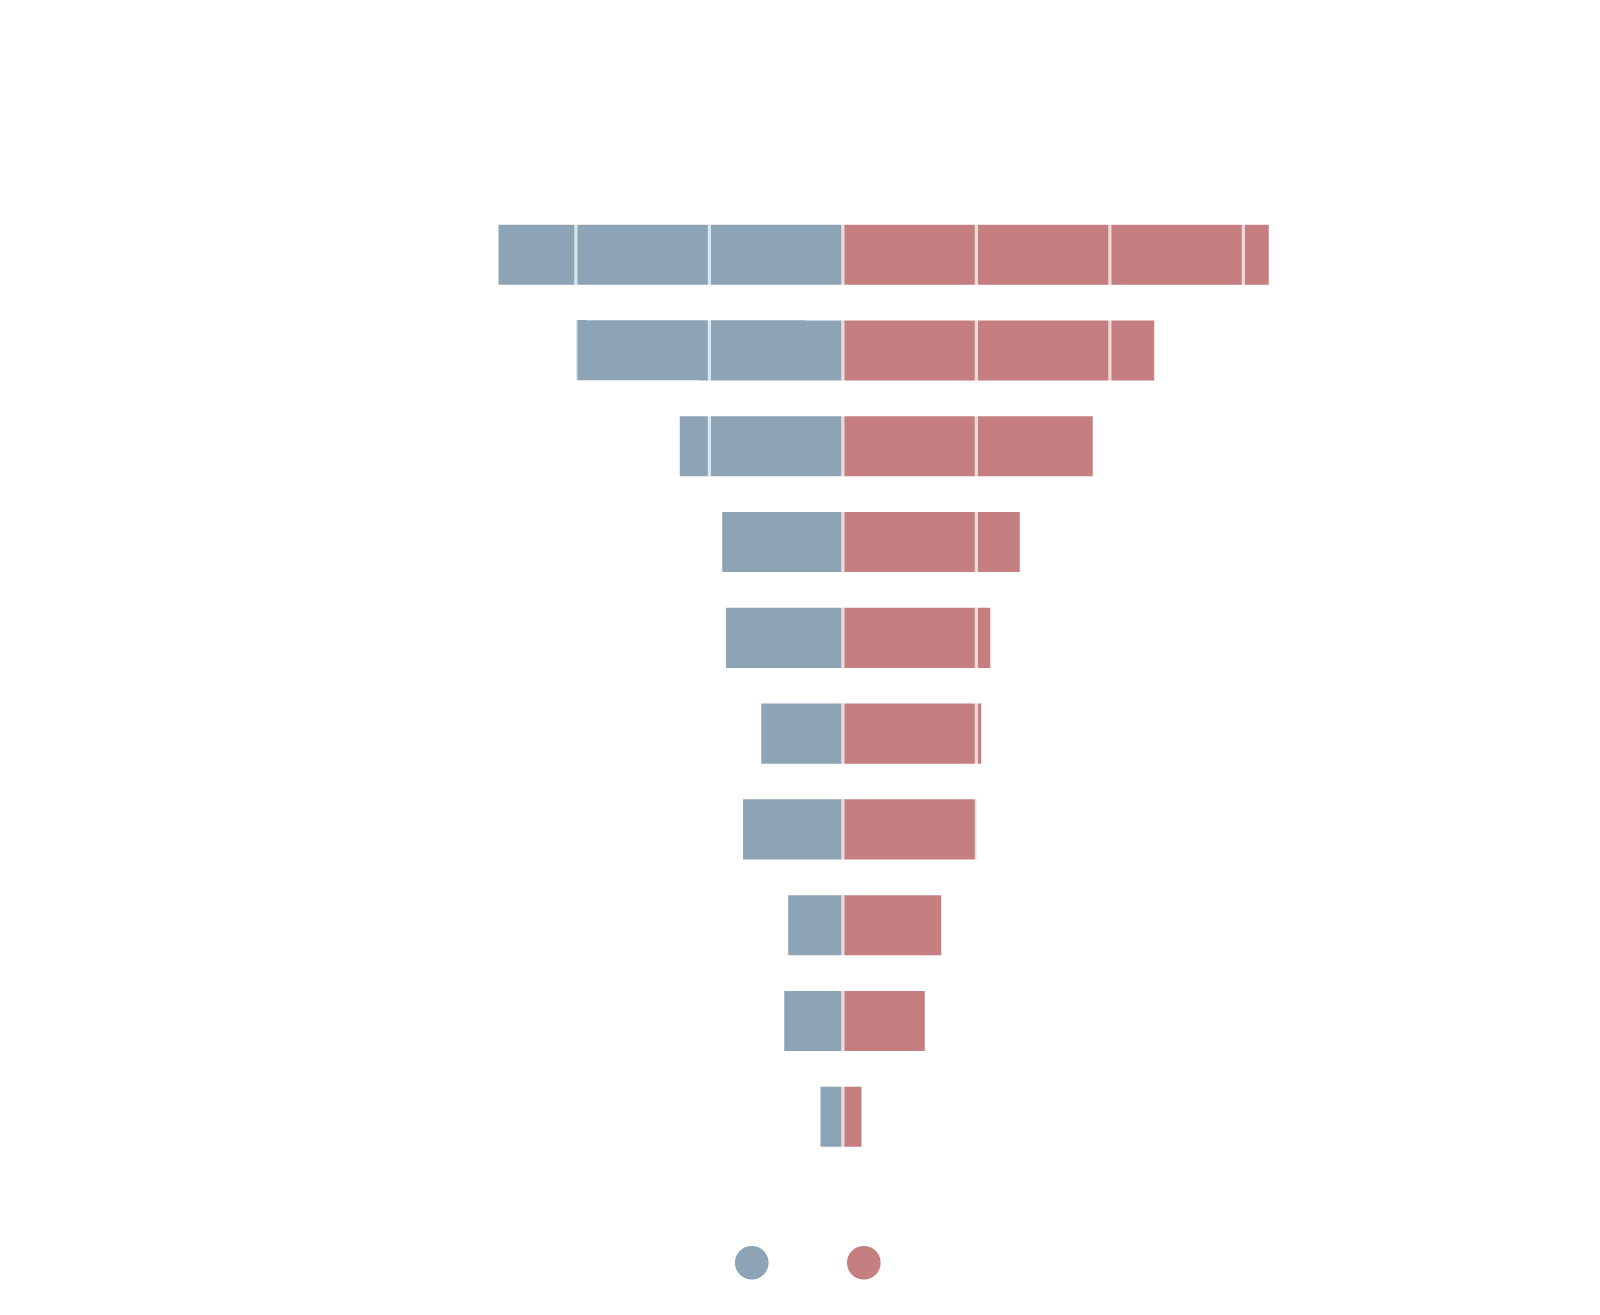 A graph showing the causes of stress for Canadian men and women, based on a Compare the Market survey